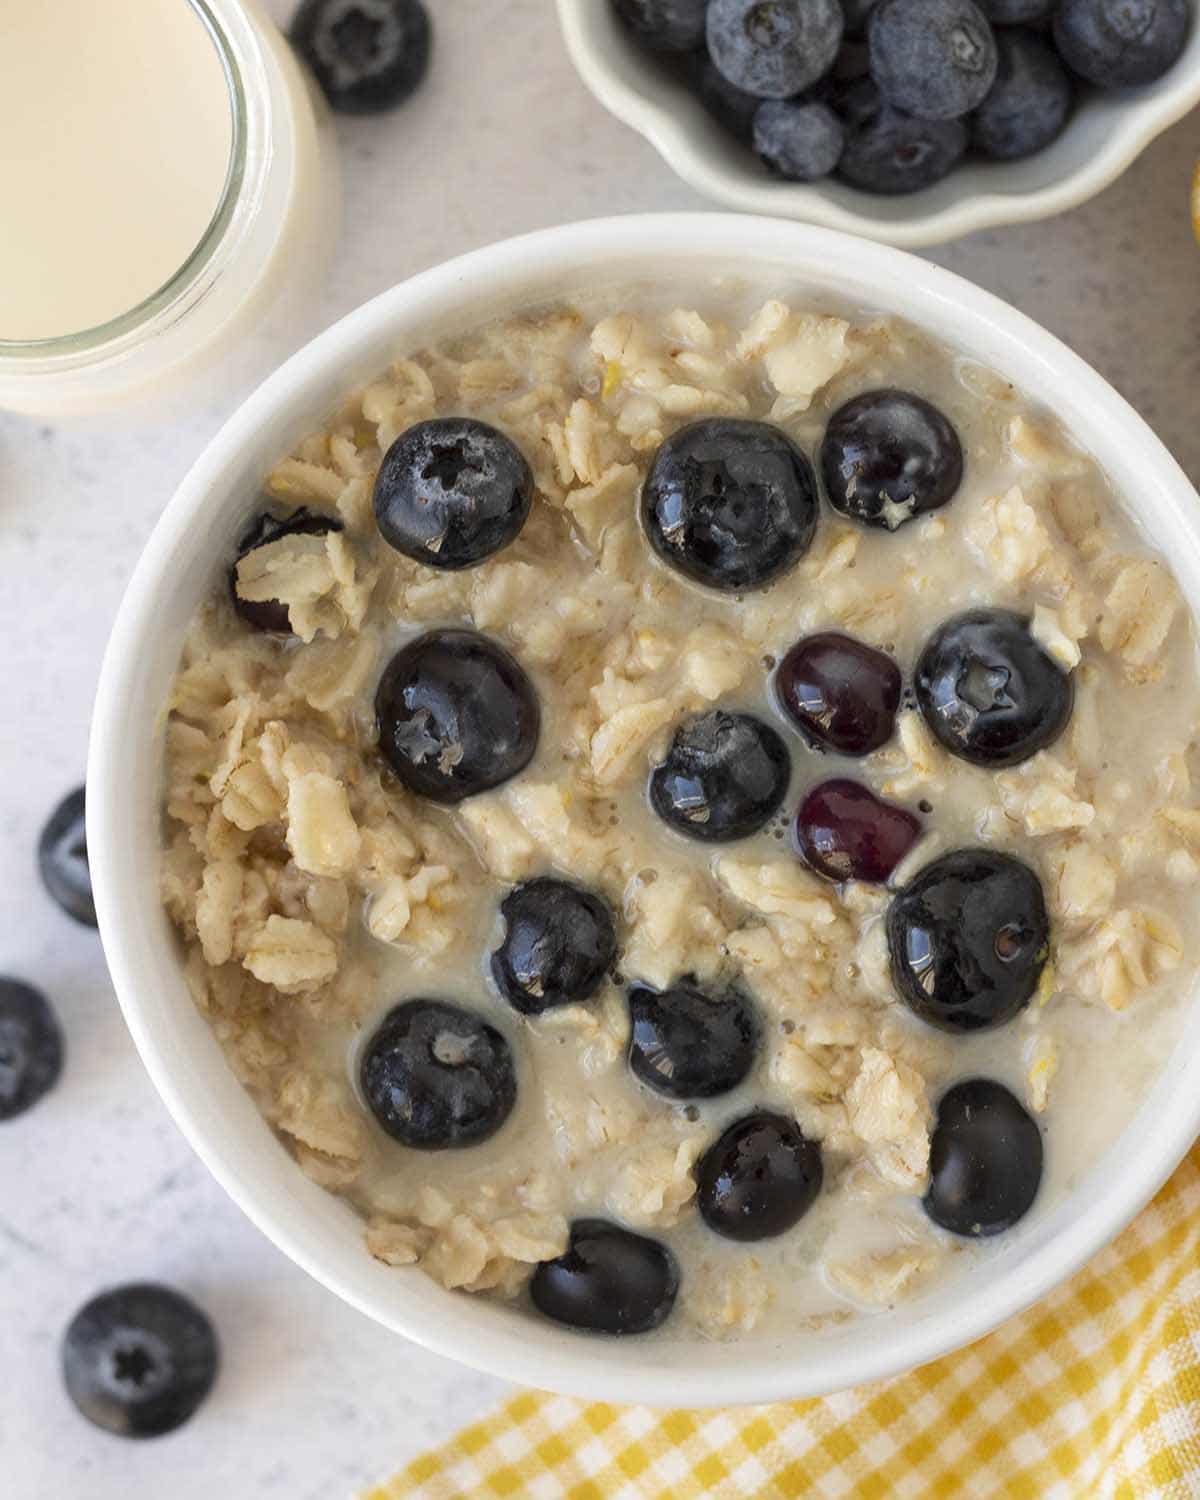 Vegan blueberry oatmeal in a white bowl with fresh blueberries on top.